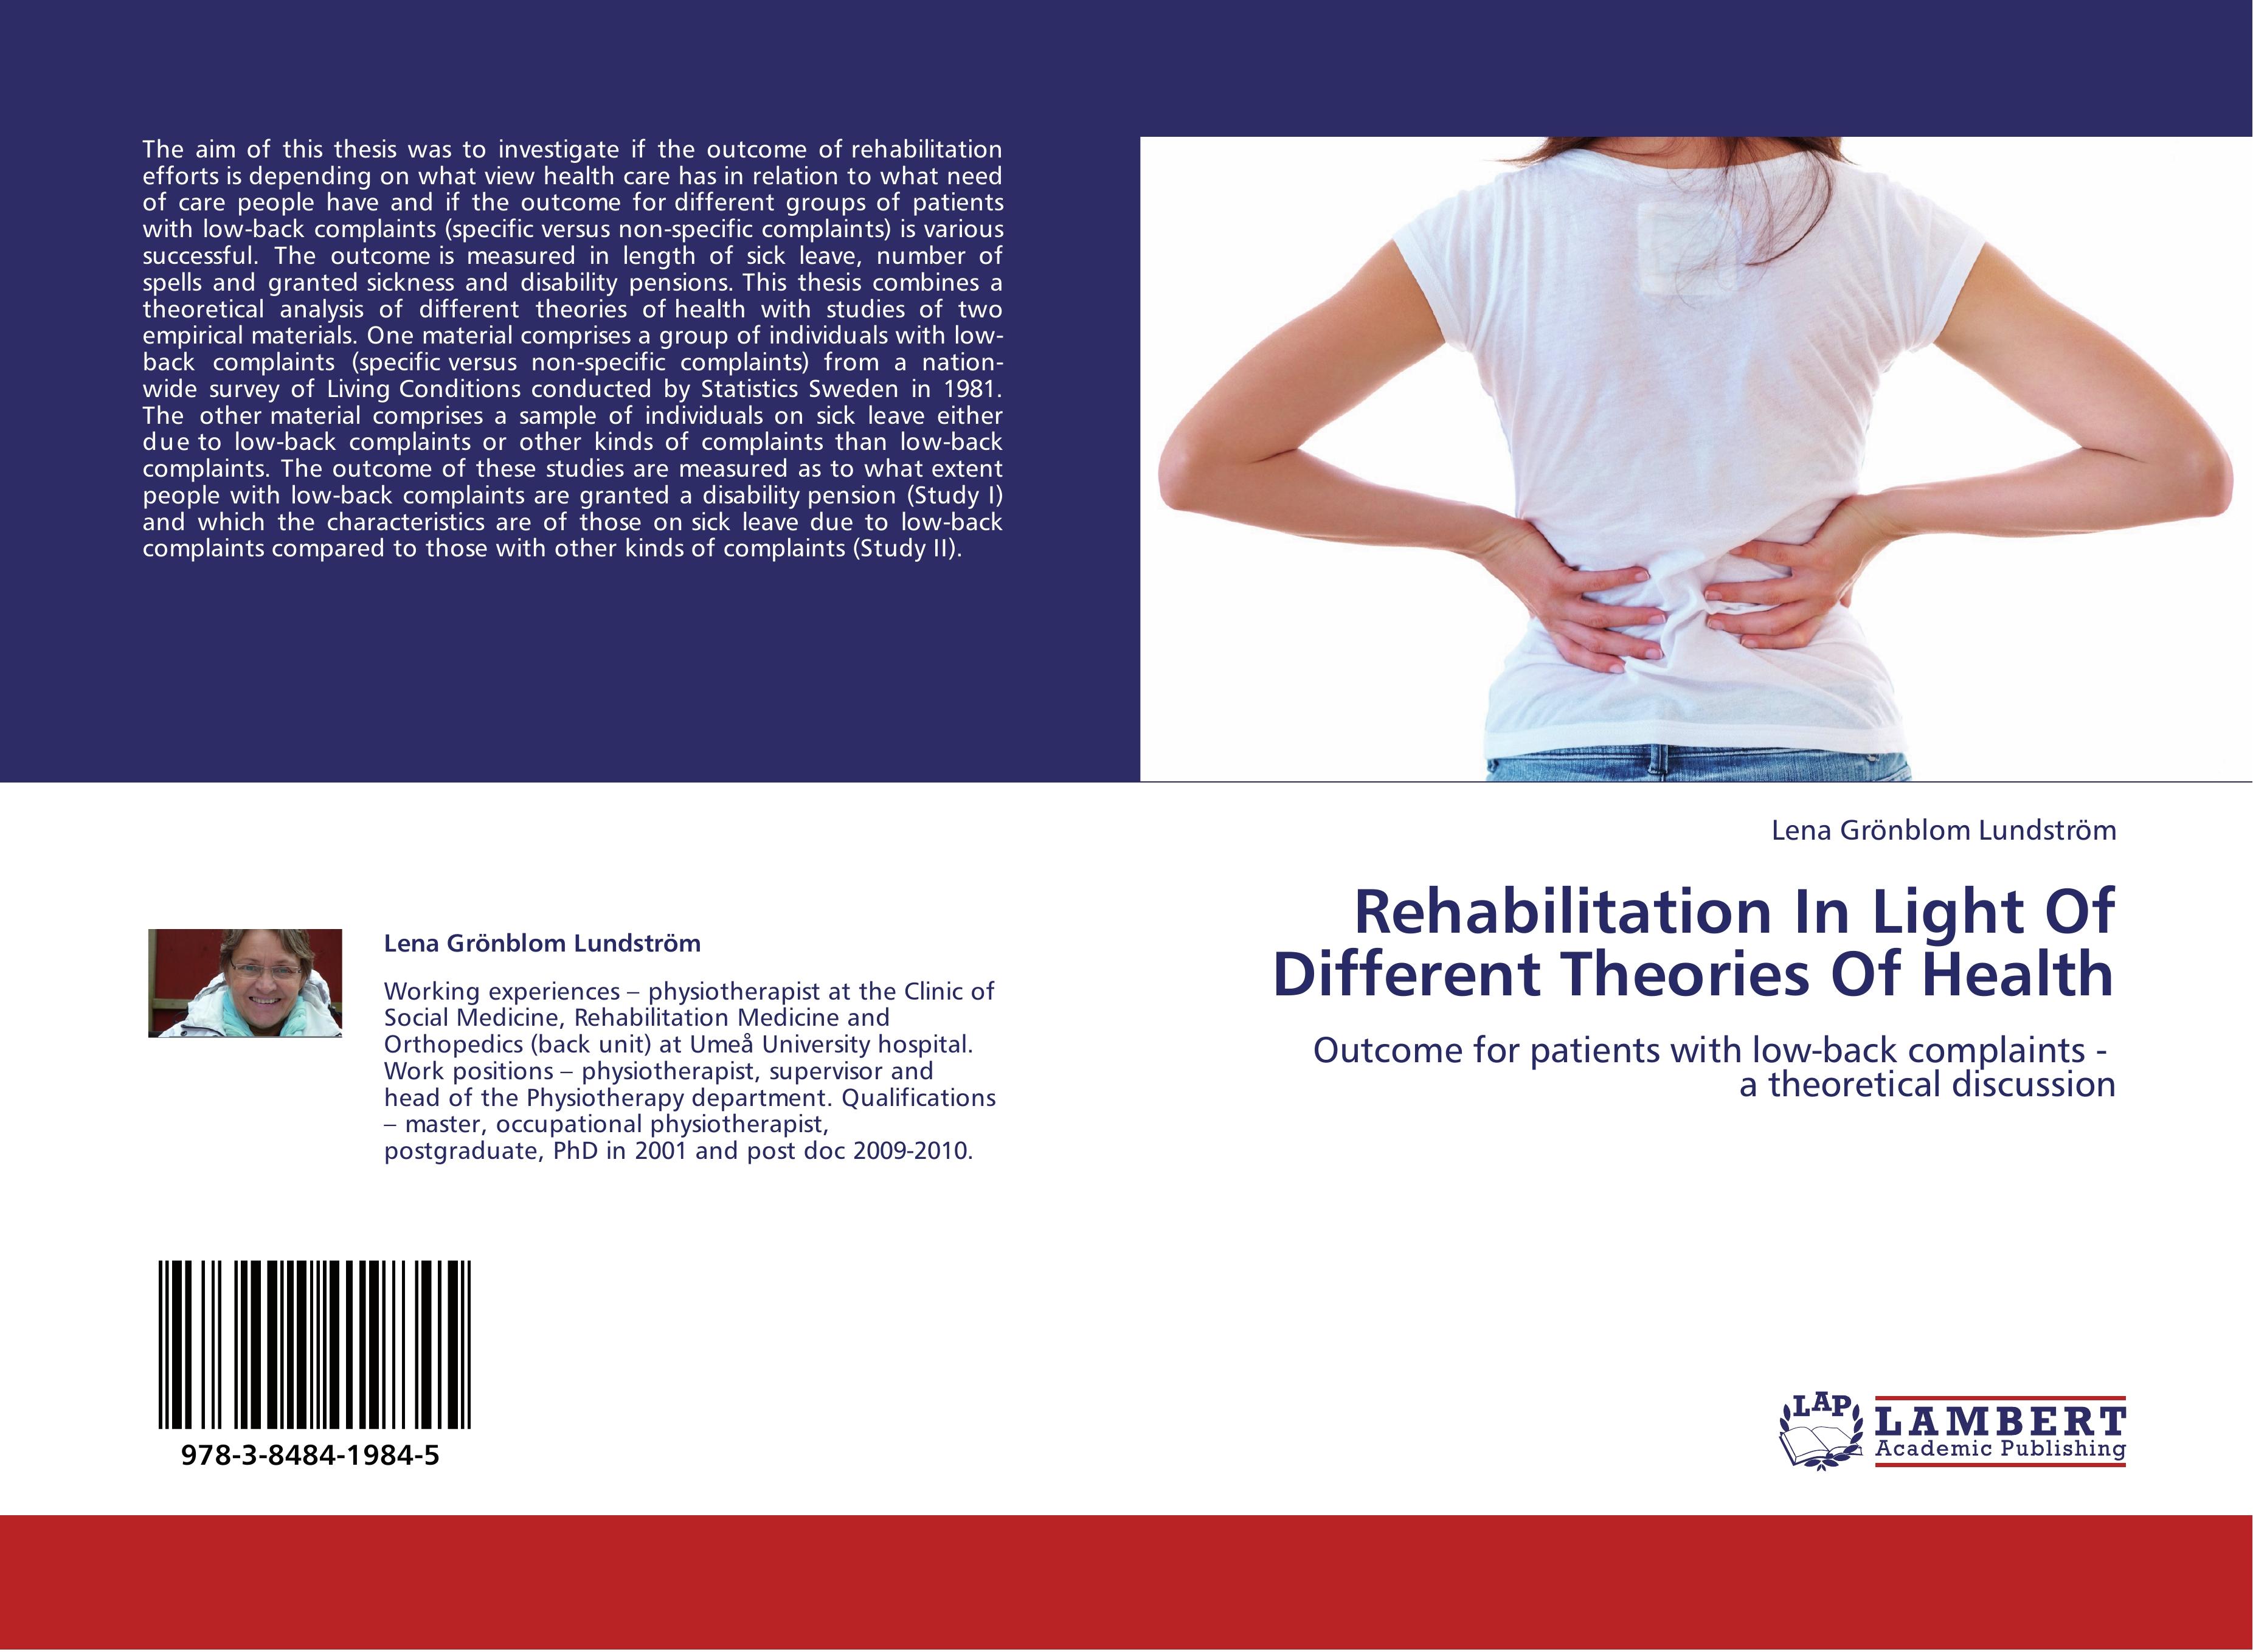 Rehabilitation In Light Of Different Theories Of Health - Lena Groenblom Lundstroem